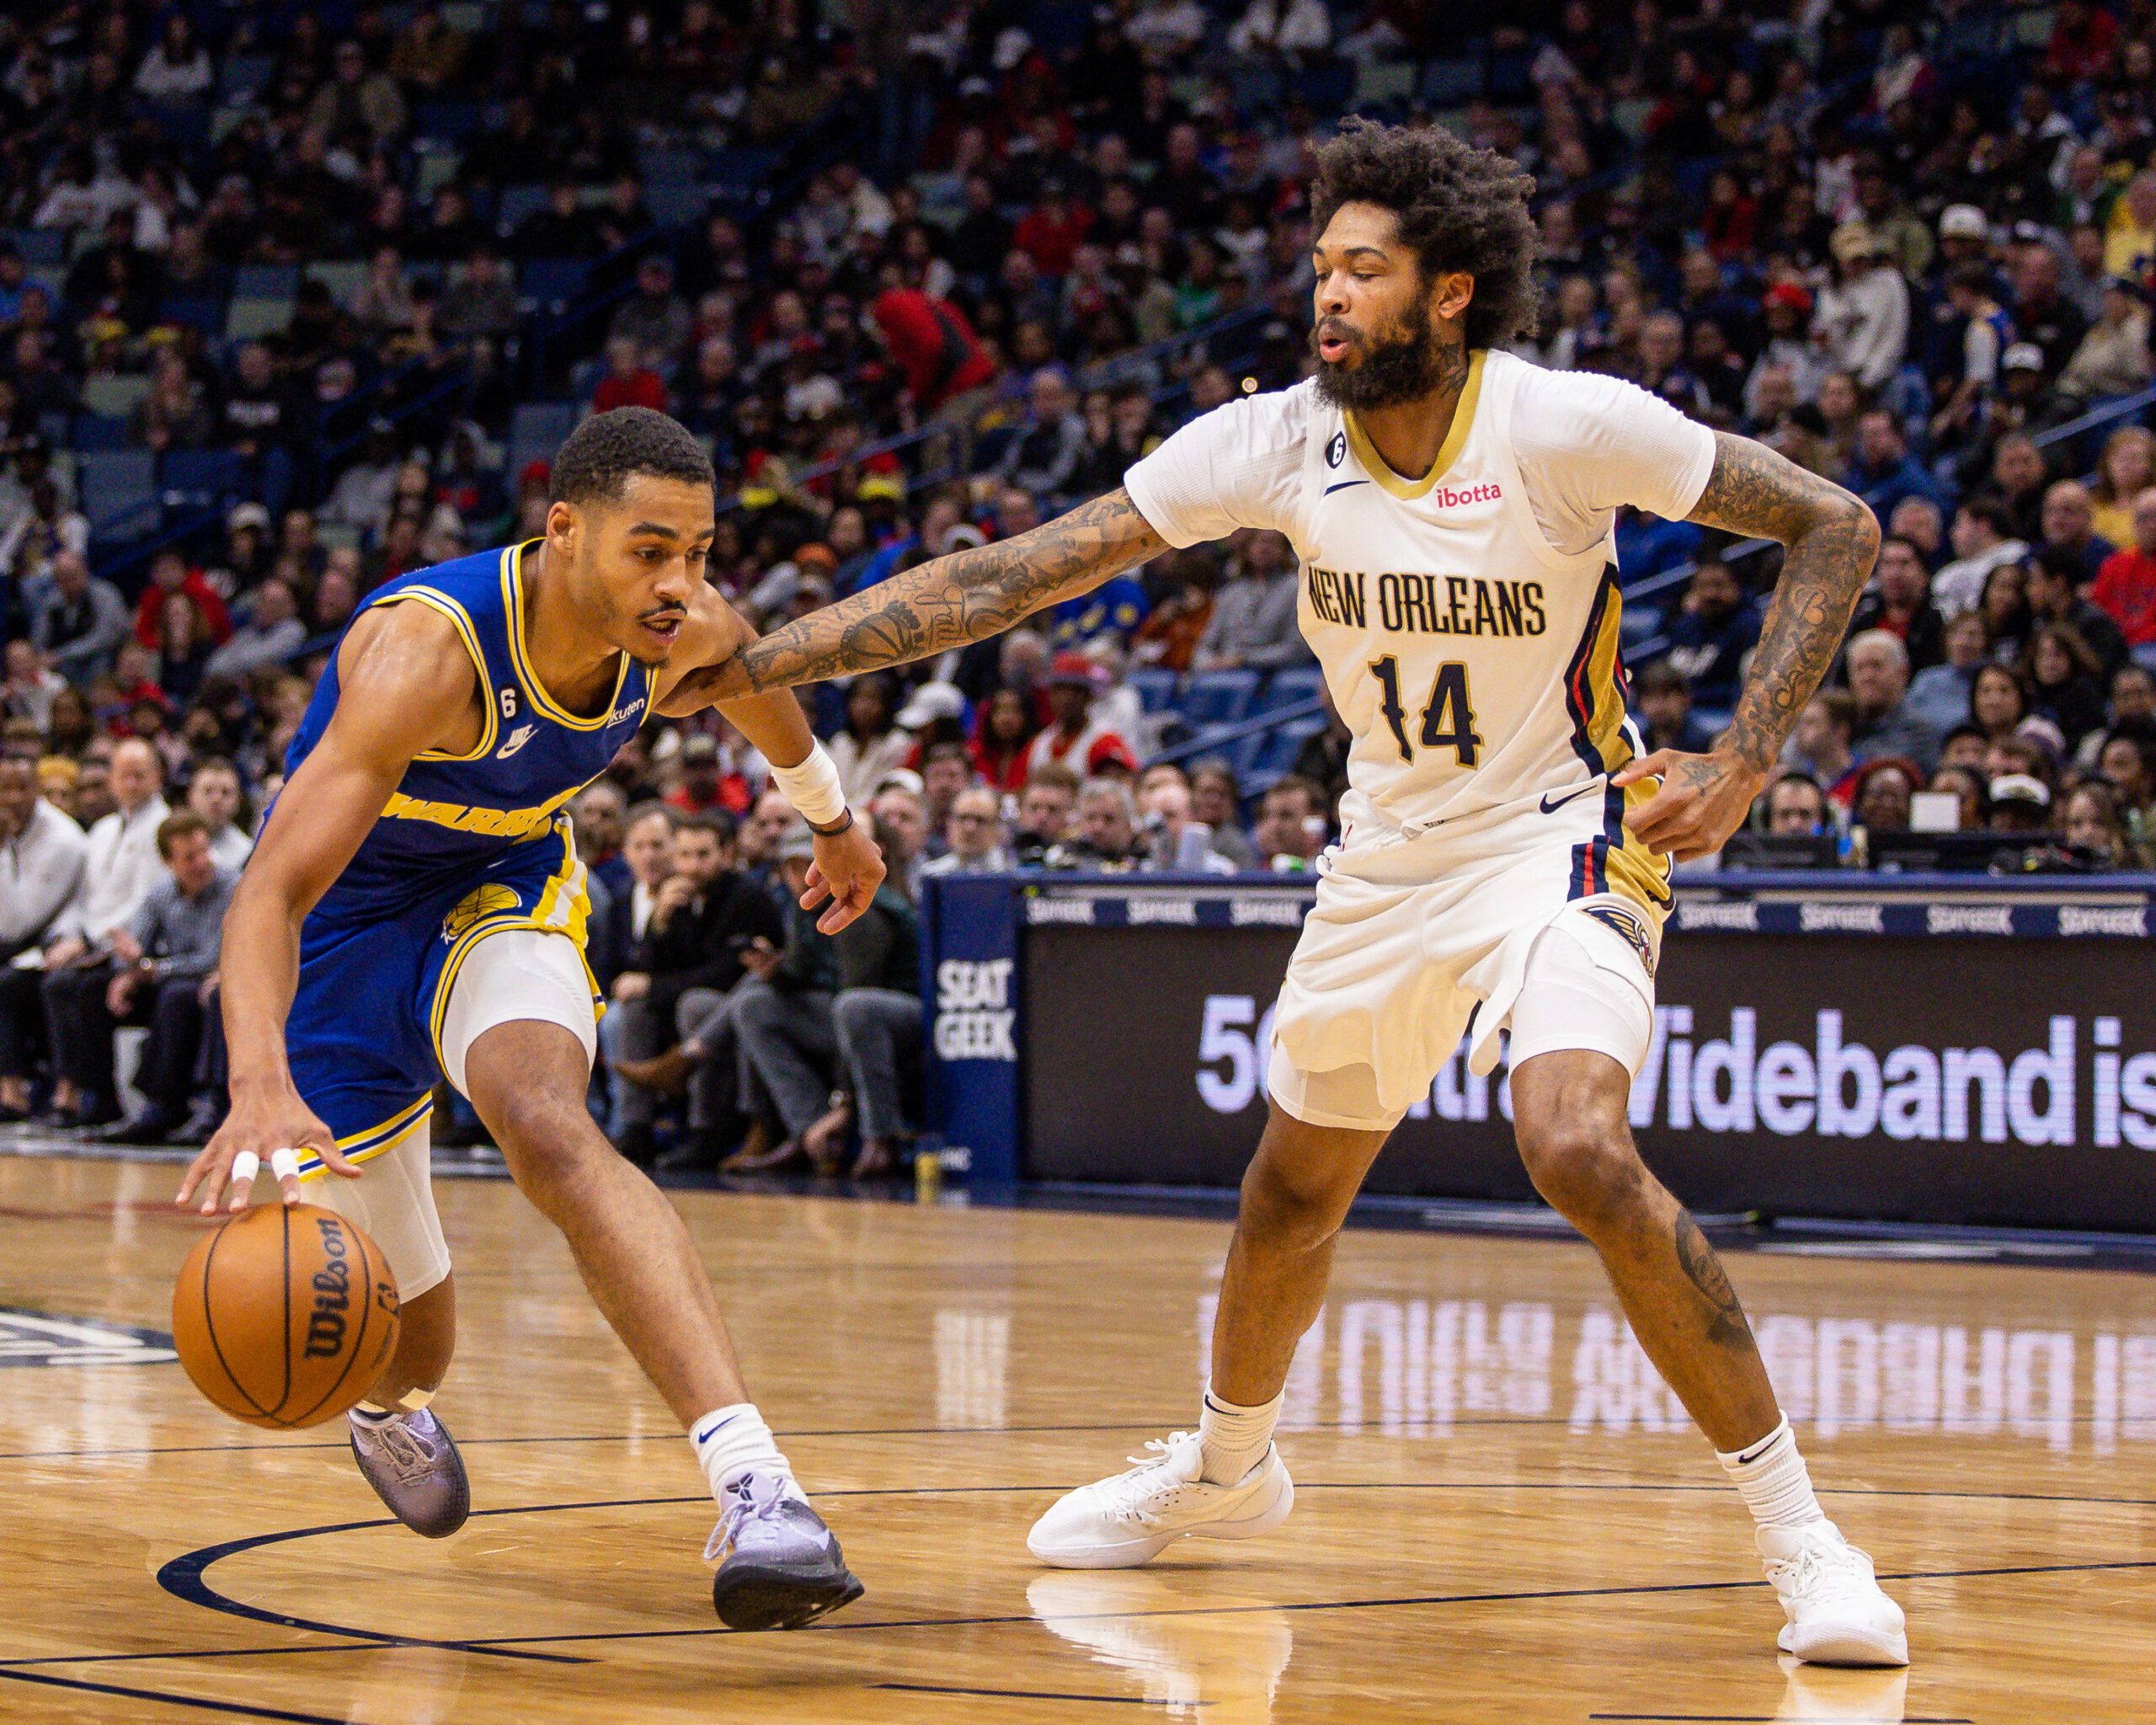 Ingram leads Pelicans’ 45-point demolition of star-less Warriors